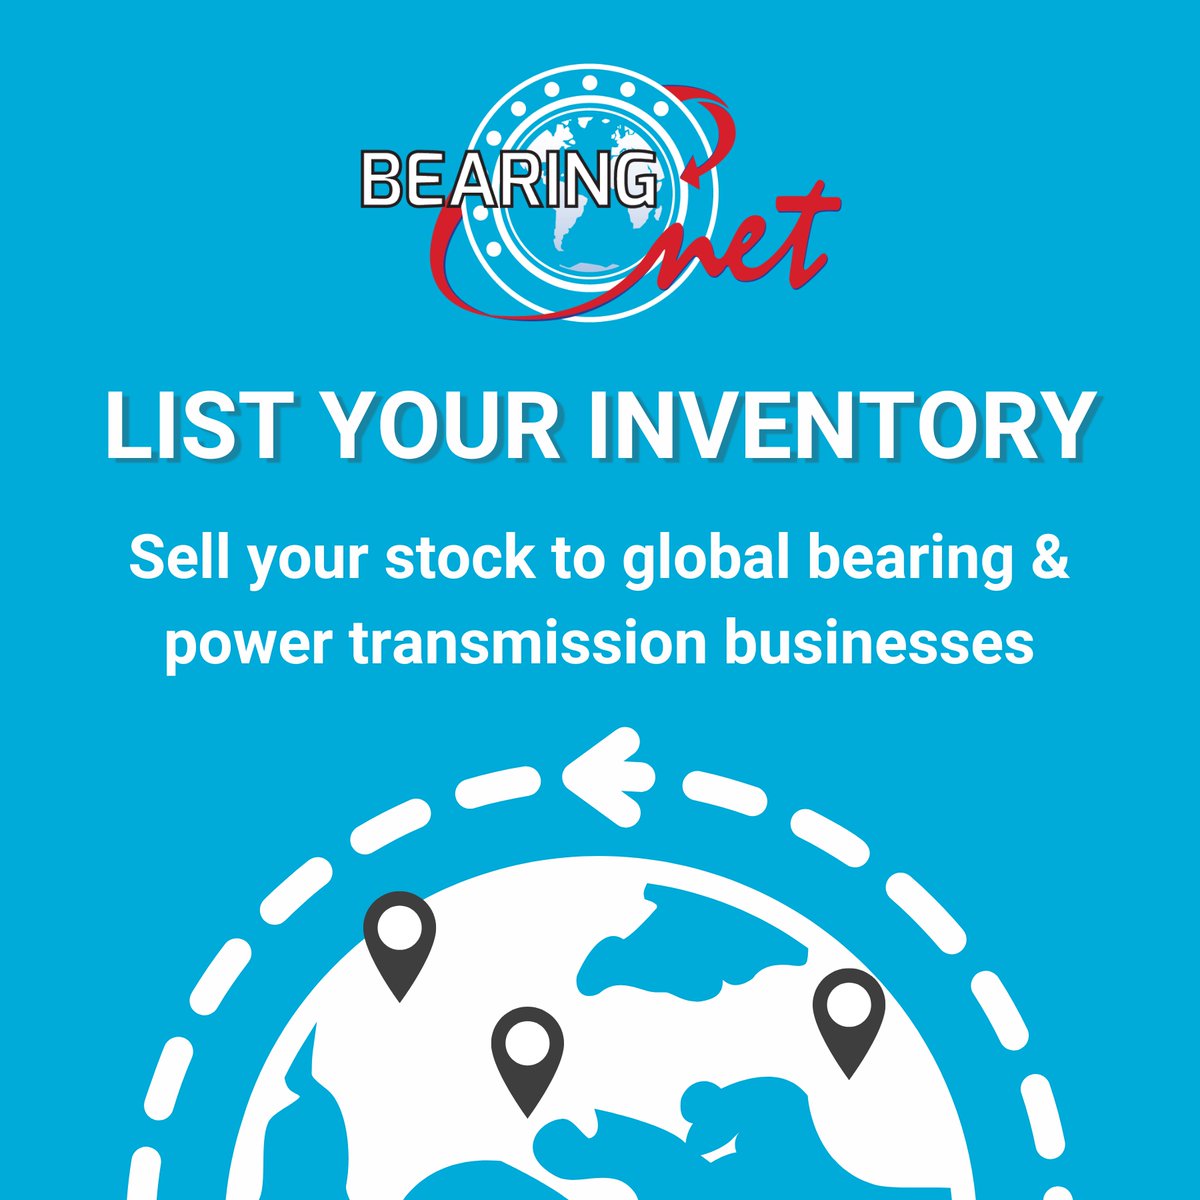 Use BearingNet as your virtual warehouse 📦 Receive more enquiries by sharing your stock with over 2,000 bearing and power transmission distributors. Become a member today by registering for a free 14-day trial here ➡️ bearingnet.net/Trial #bearingnet #bearings #inventory